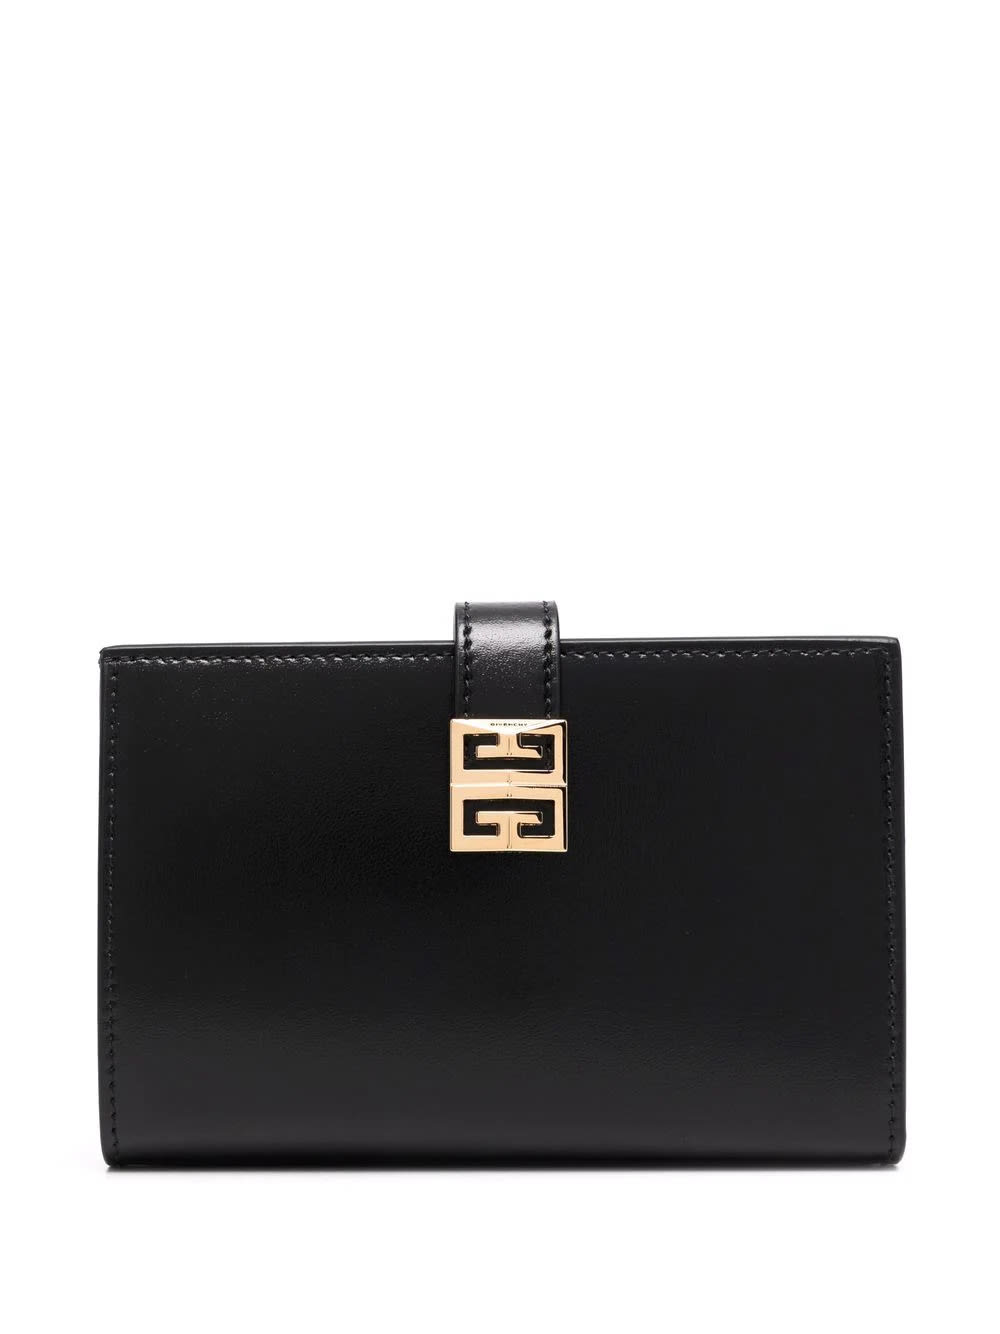 Givenchy Woman Black And Golden 4g Wallet In Box Leather